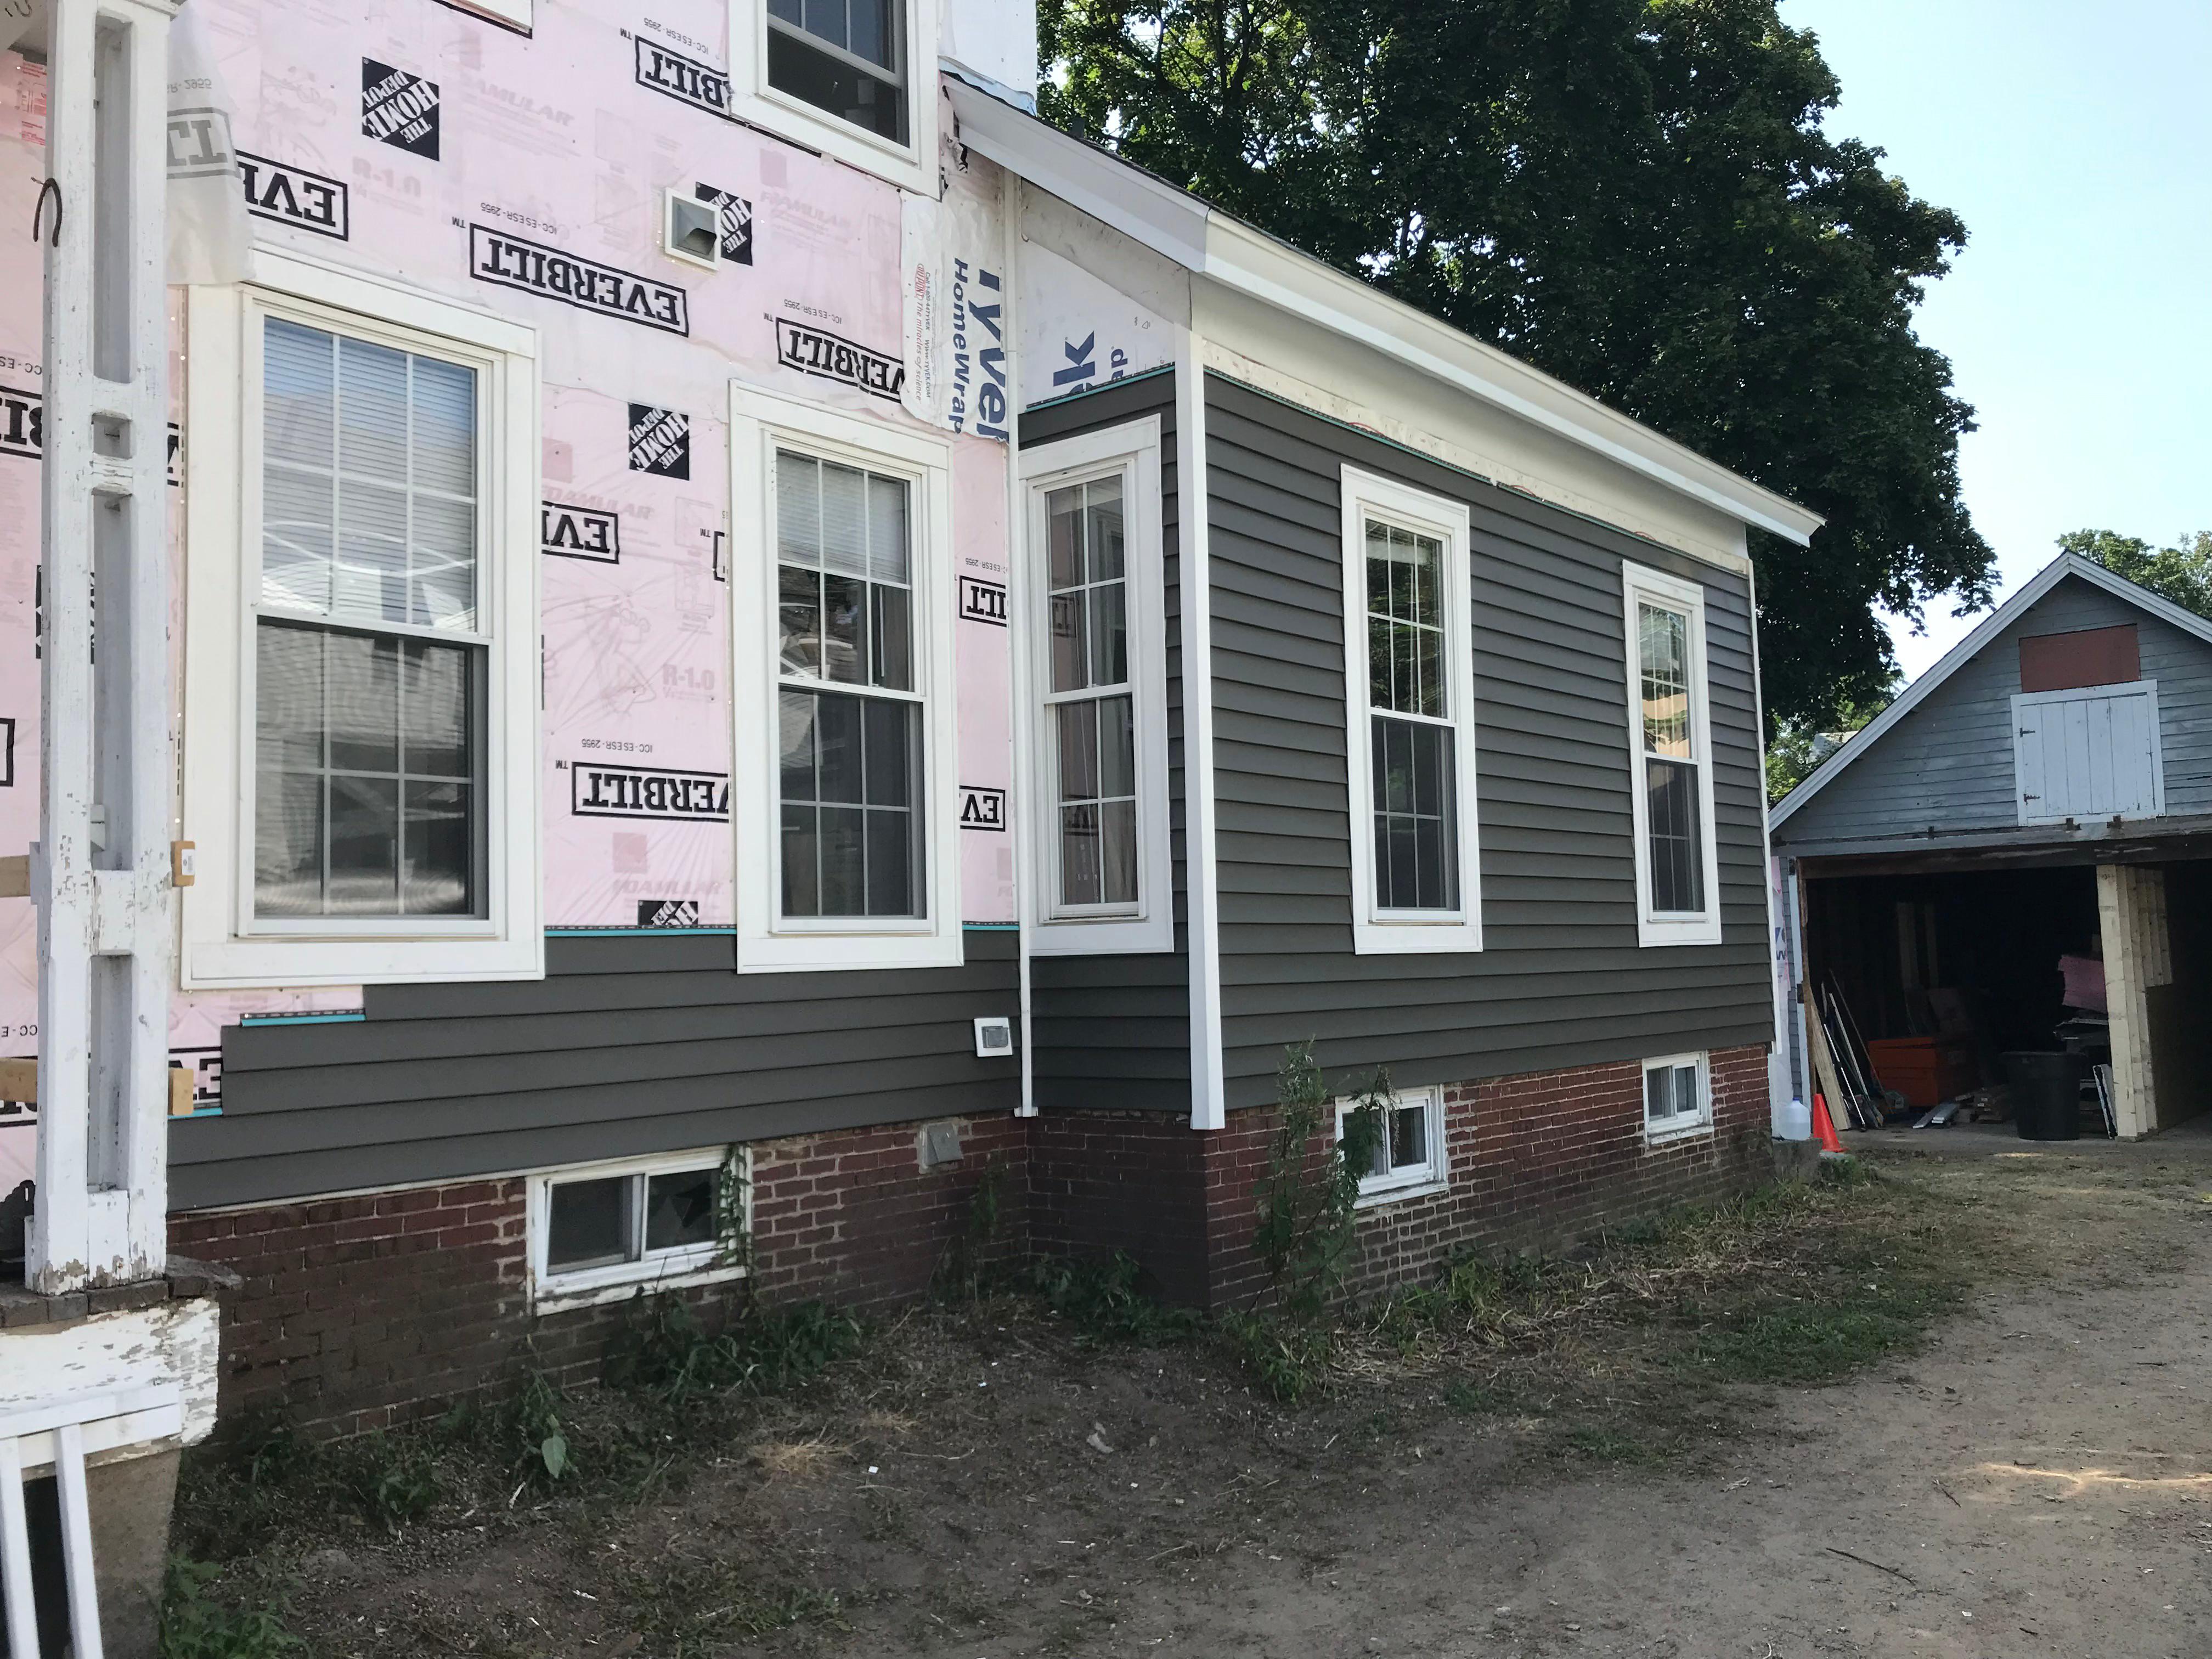 Our handyman traveled to Concord, NH, to upgrade insulation and vinyl siding for a real estate investor improving his properties.